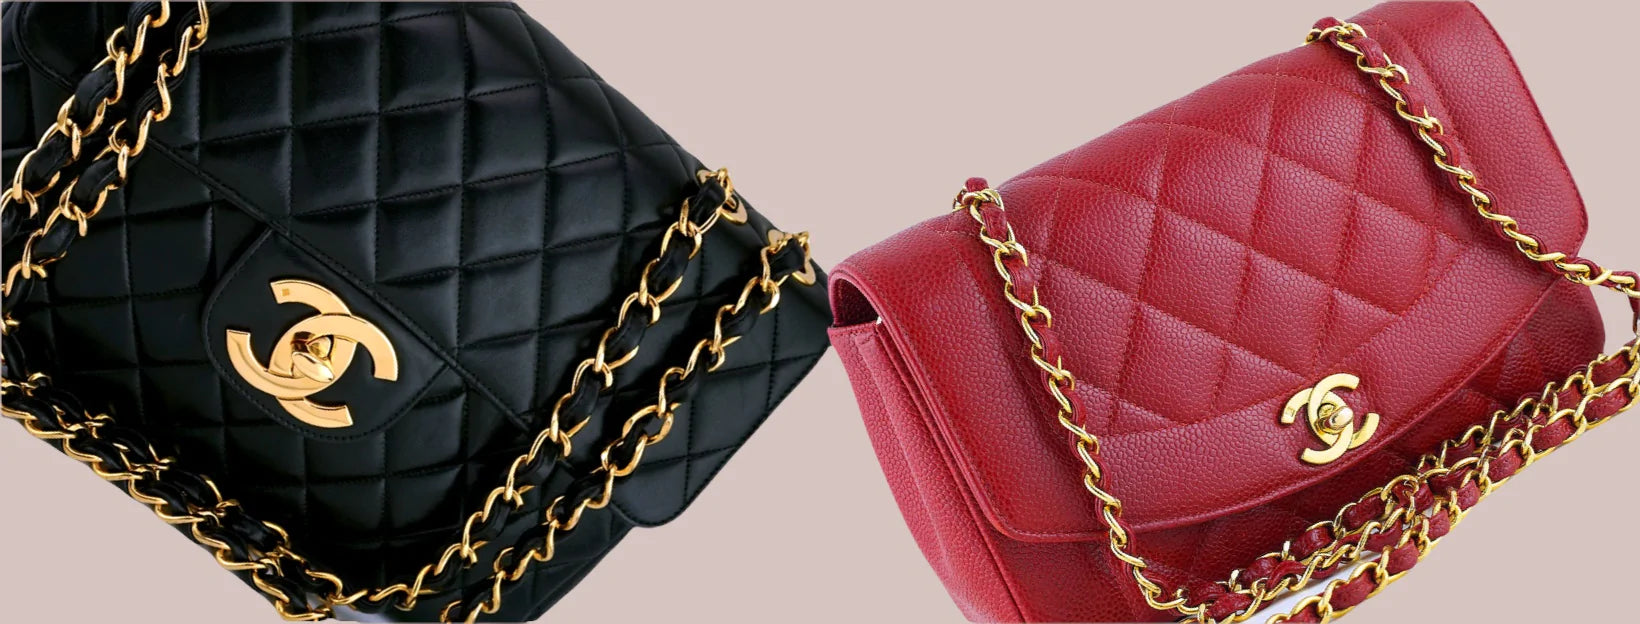 Chanel Vintage Red Curved Quilted Flap Bag 24k GHW – Boutique Patina